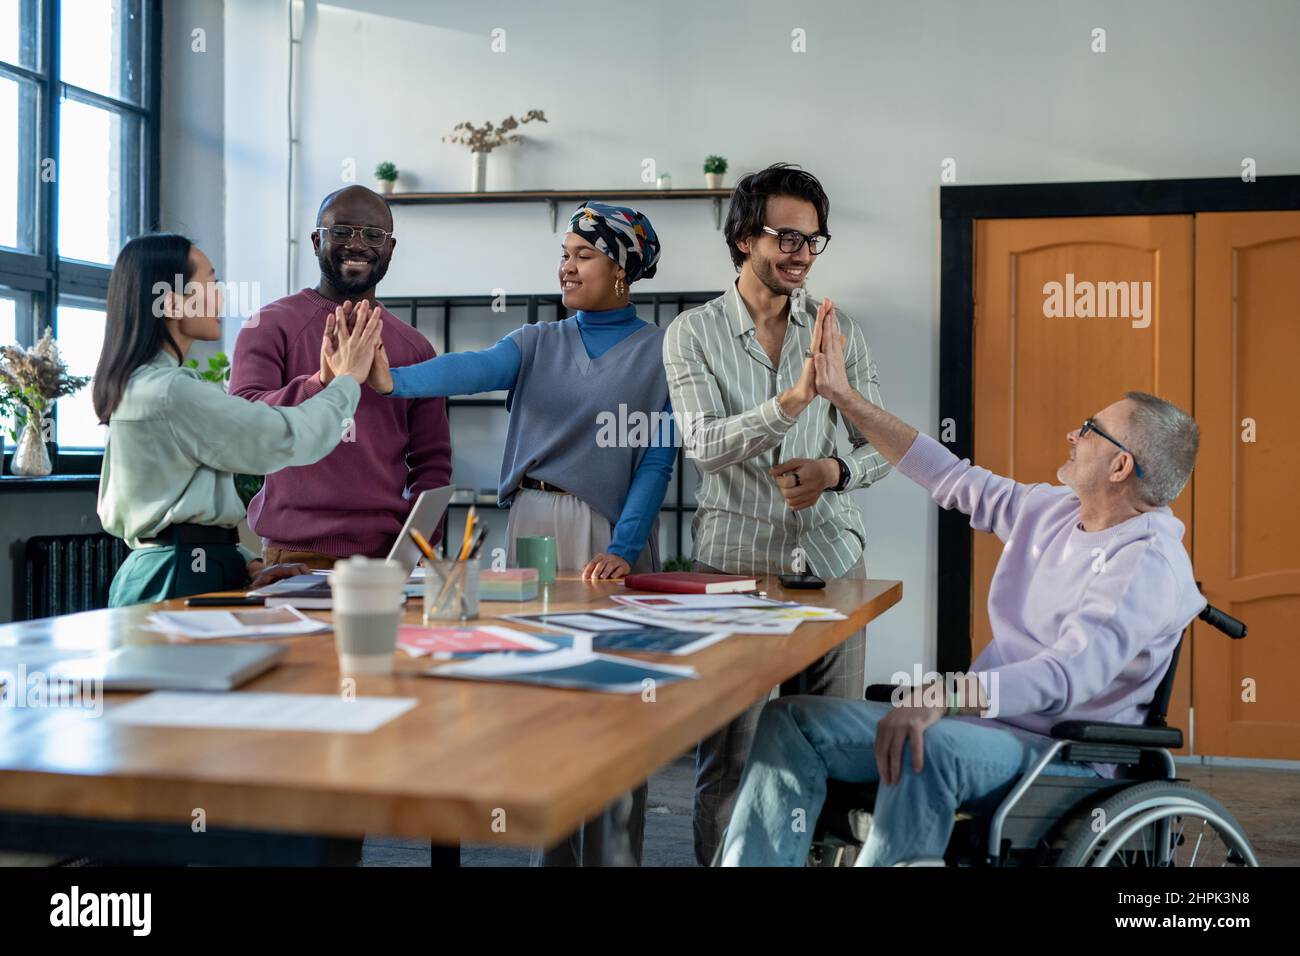 Successful intercultural colleagues giving each other high five as symbol of team building while standing by table with financial papers Stock Photo